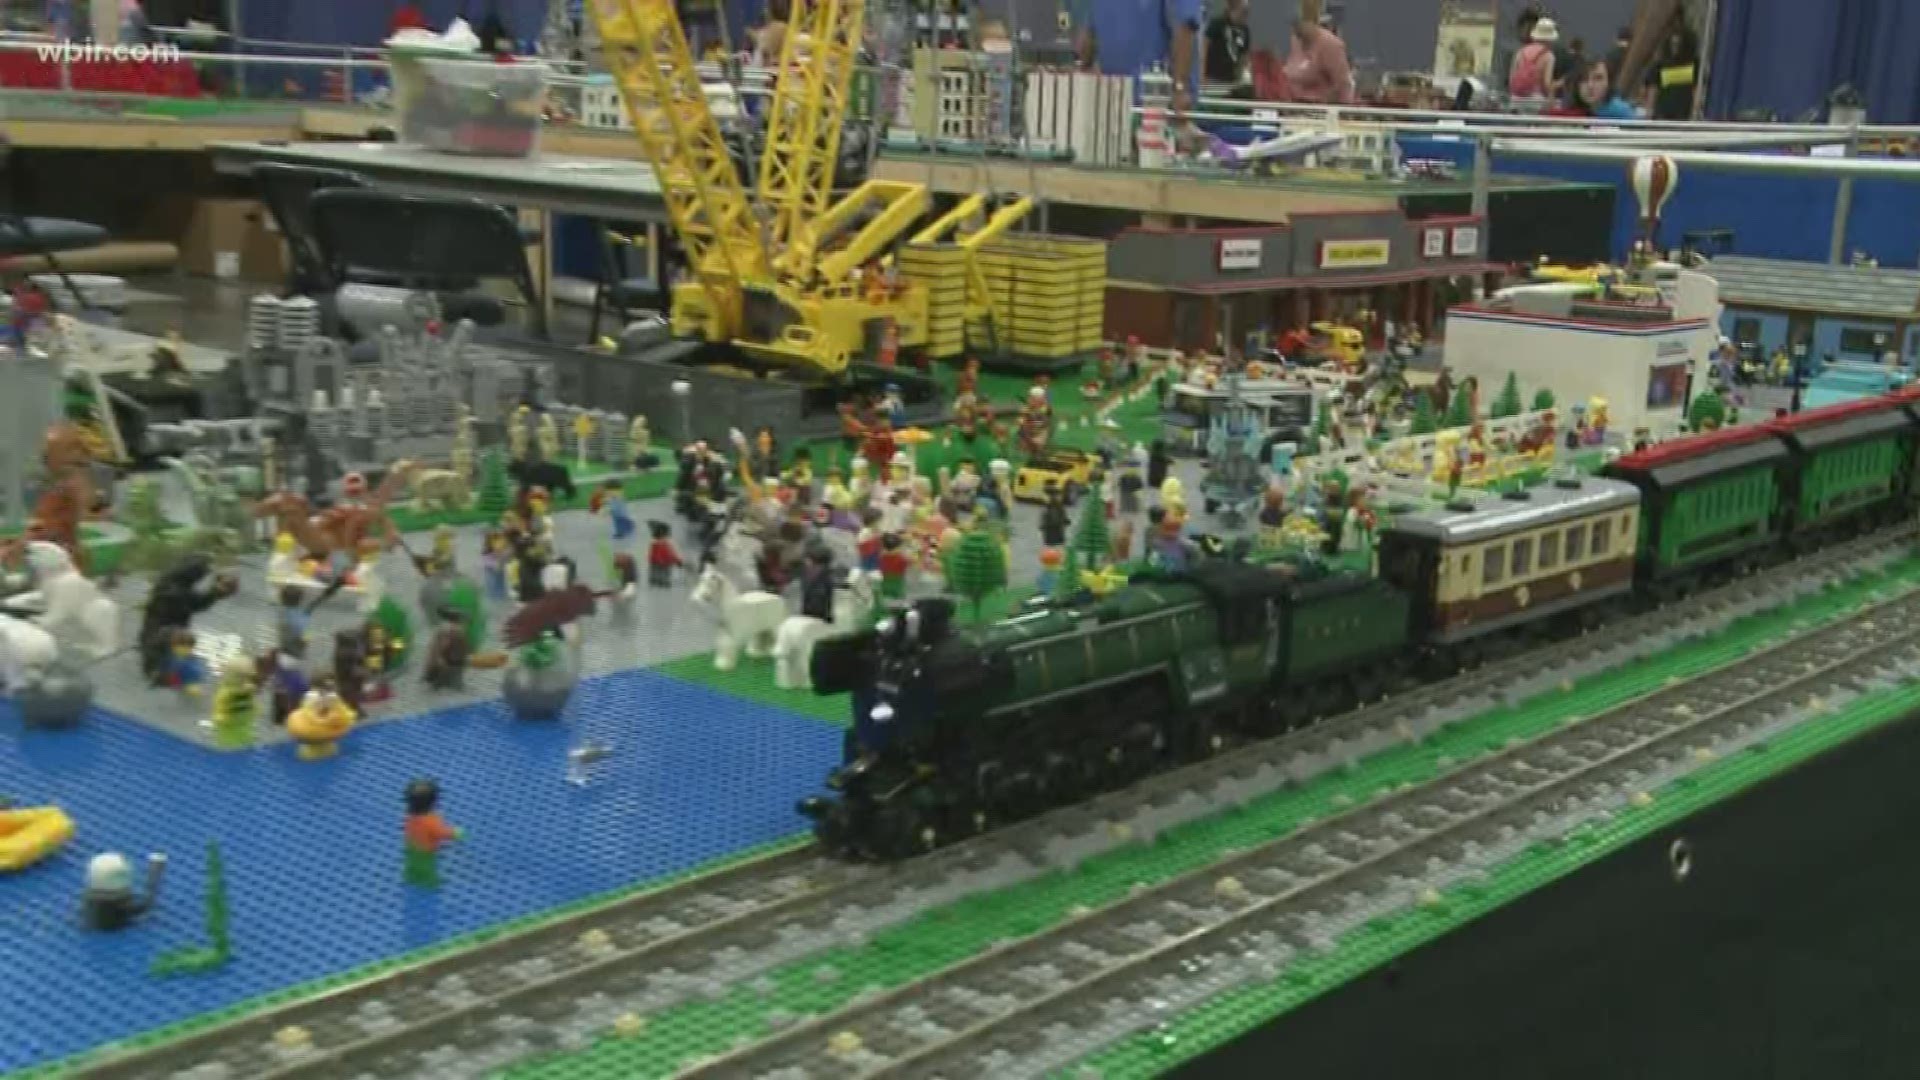 There were giant LEGO displays built by professional LEGO artists.